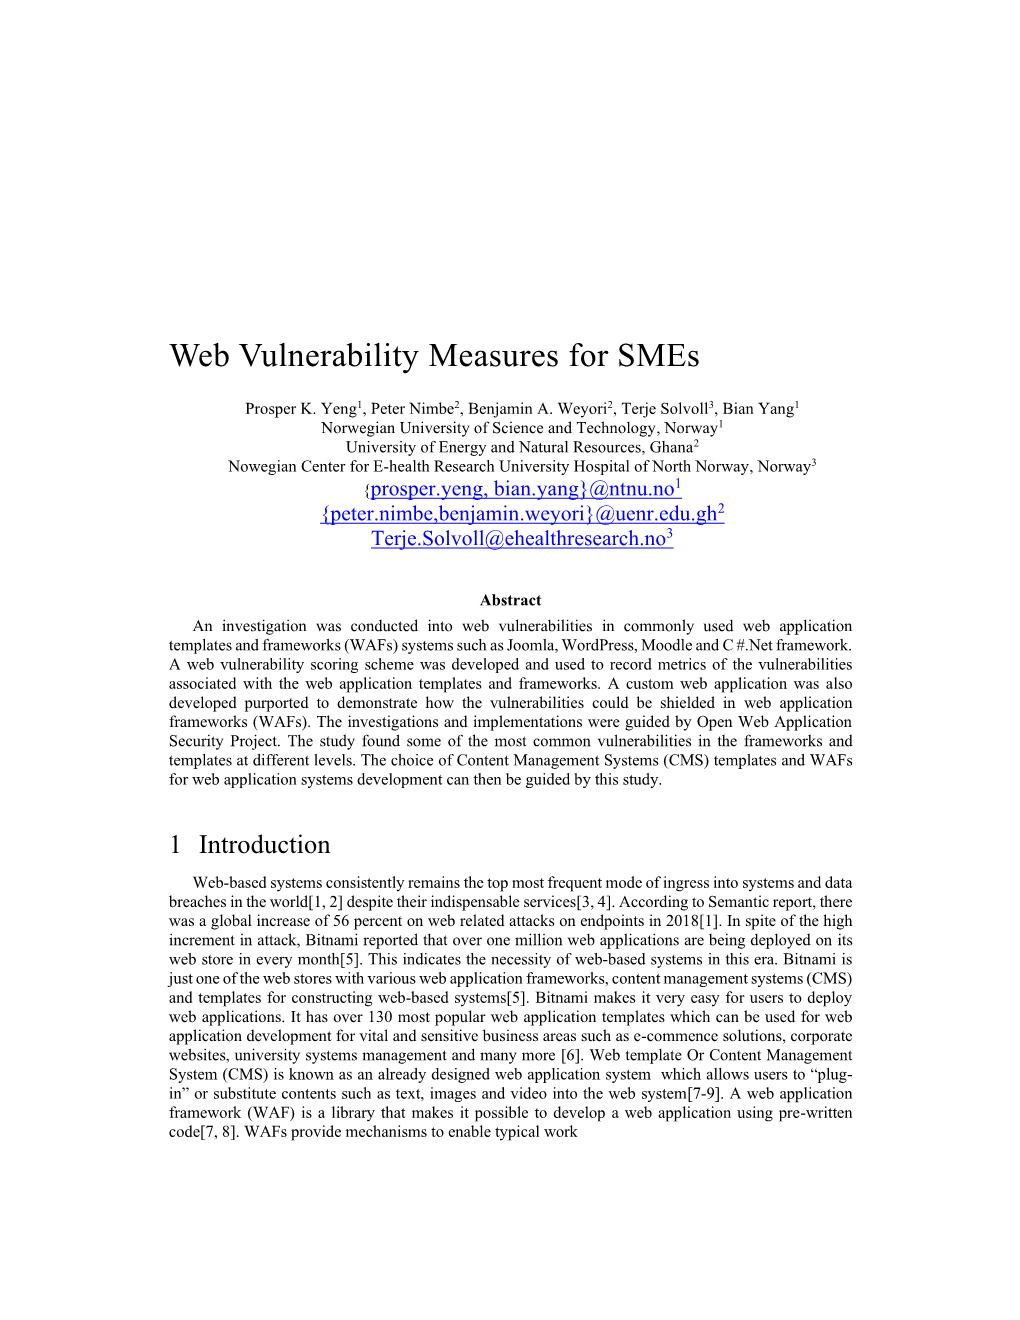 Web Vulnerability Measures for Smes